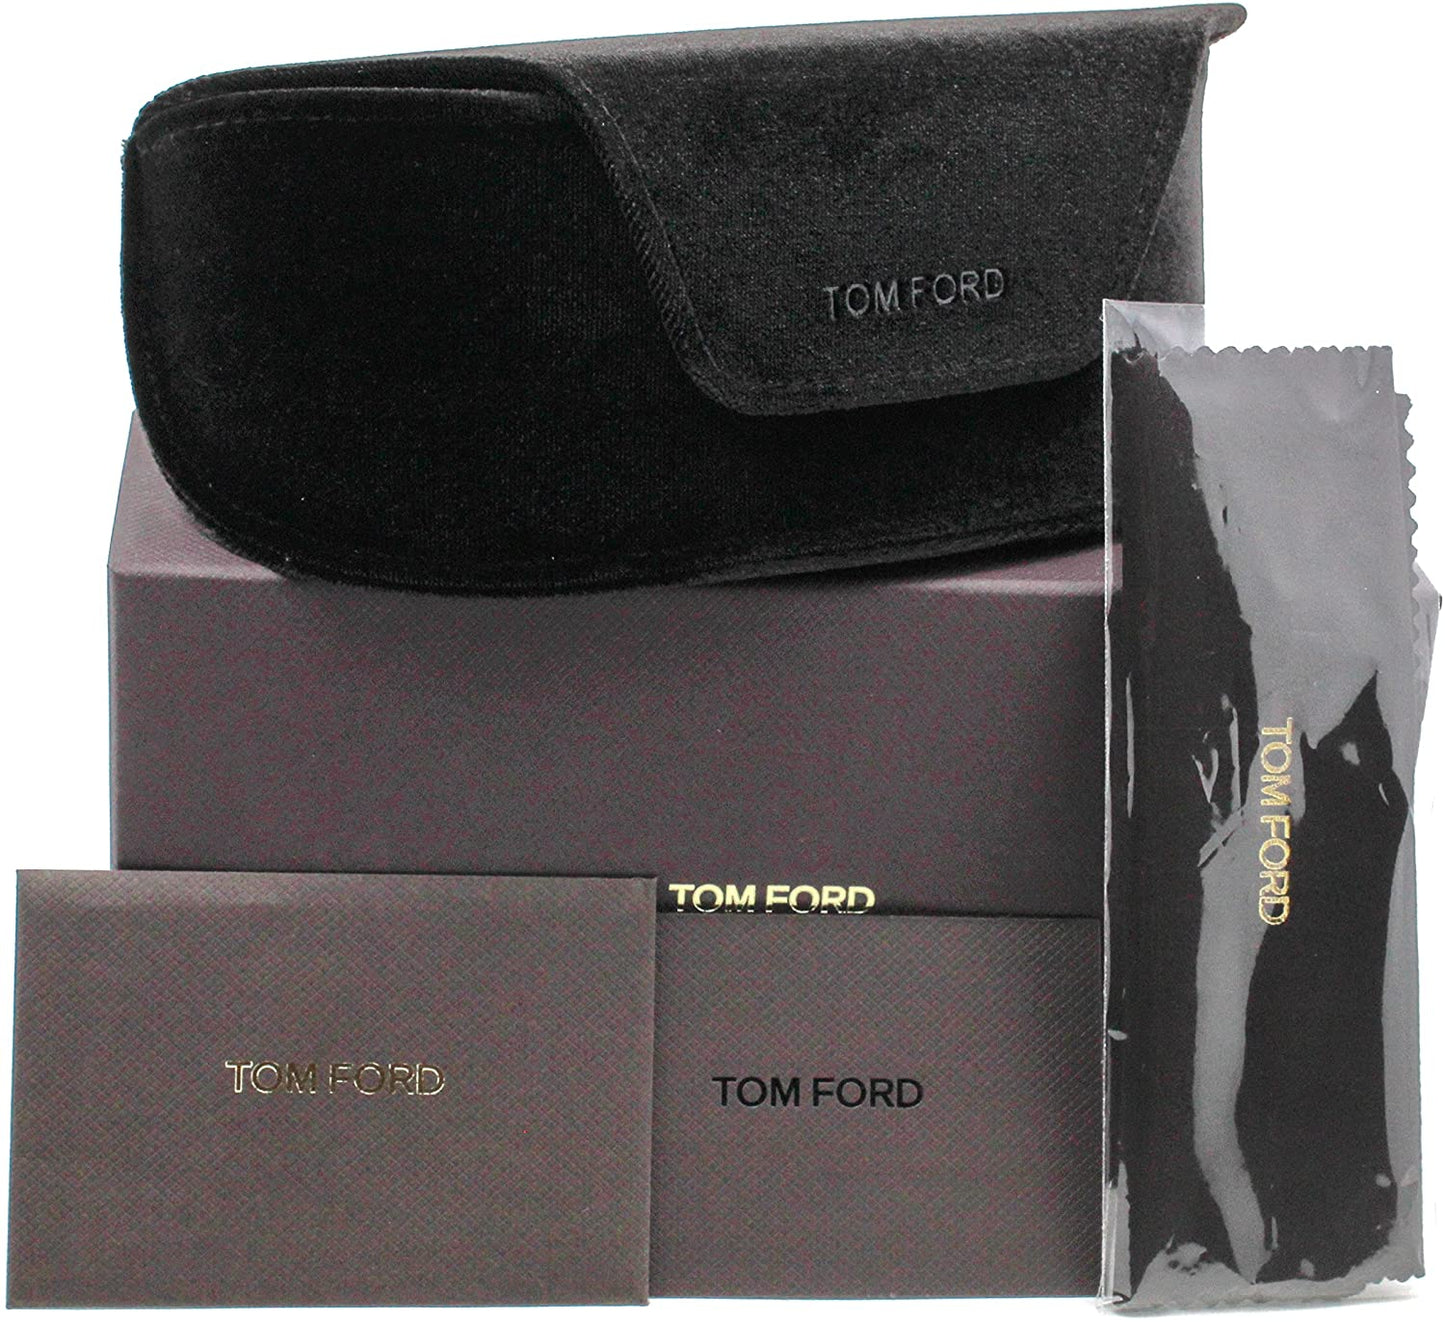 Tom Ford FT0989-52Y-56 56mm New Sunglasses